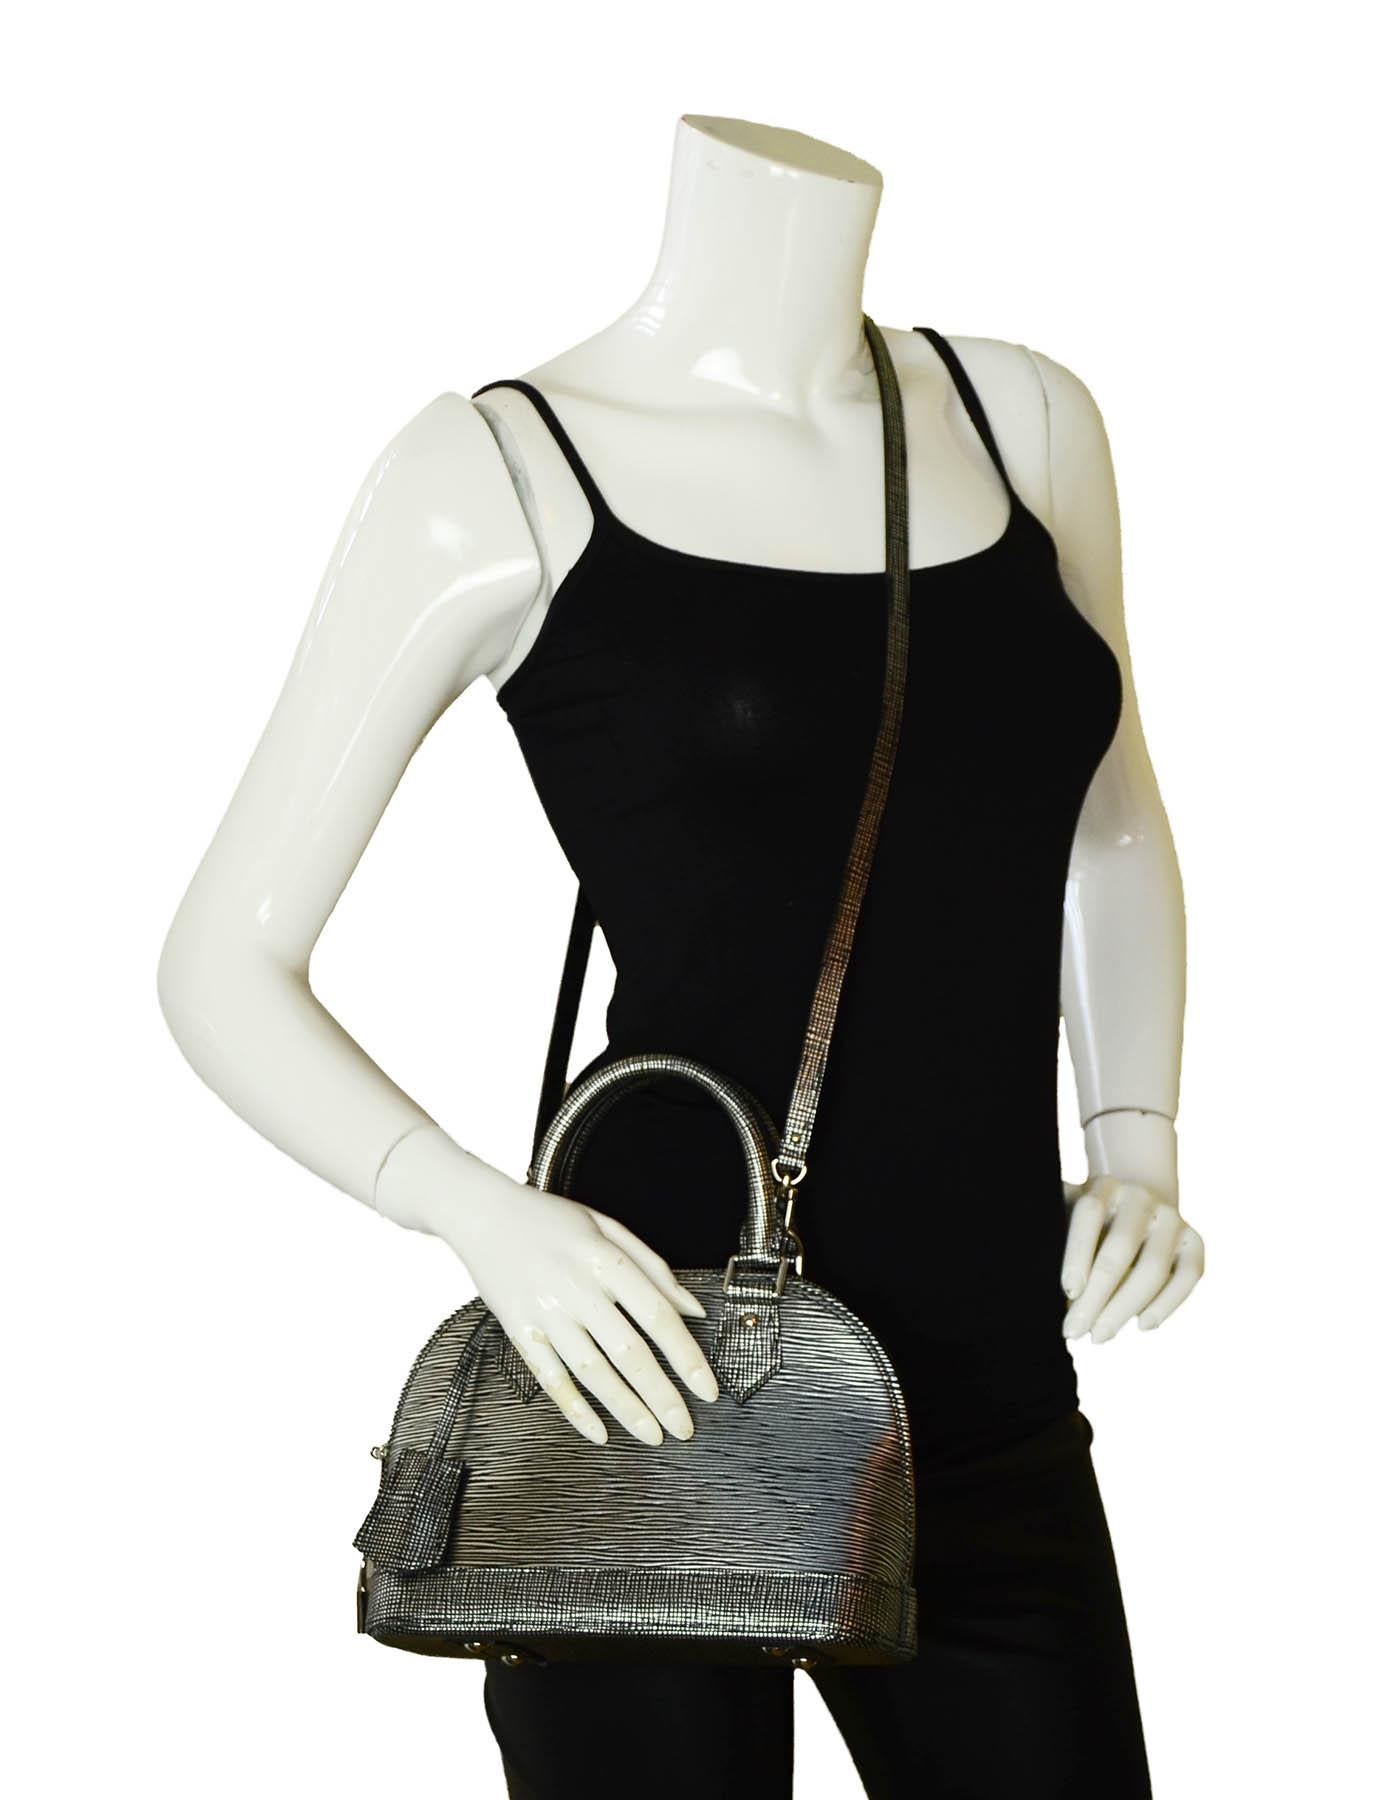 Louis Vuitton Black & Silver Epi Leather Alma BB Top Handle Crossbody Bag

Made In: France
Color: Silver and black
Hardware: Silvertone
Materials: Epi leather
Lining: Black alcantara 
Closure/Opening: Two-way zip top
Interior Pockets: One